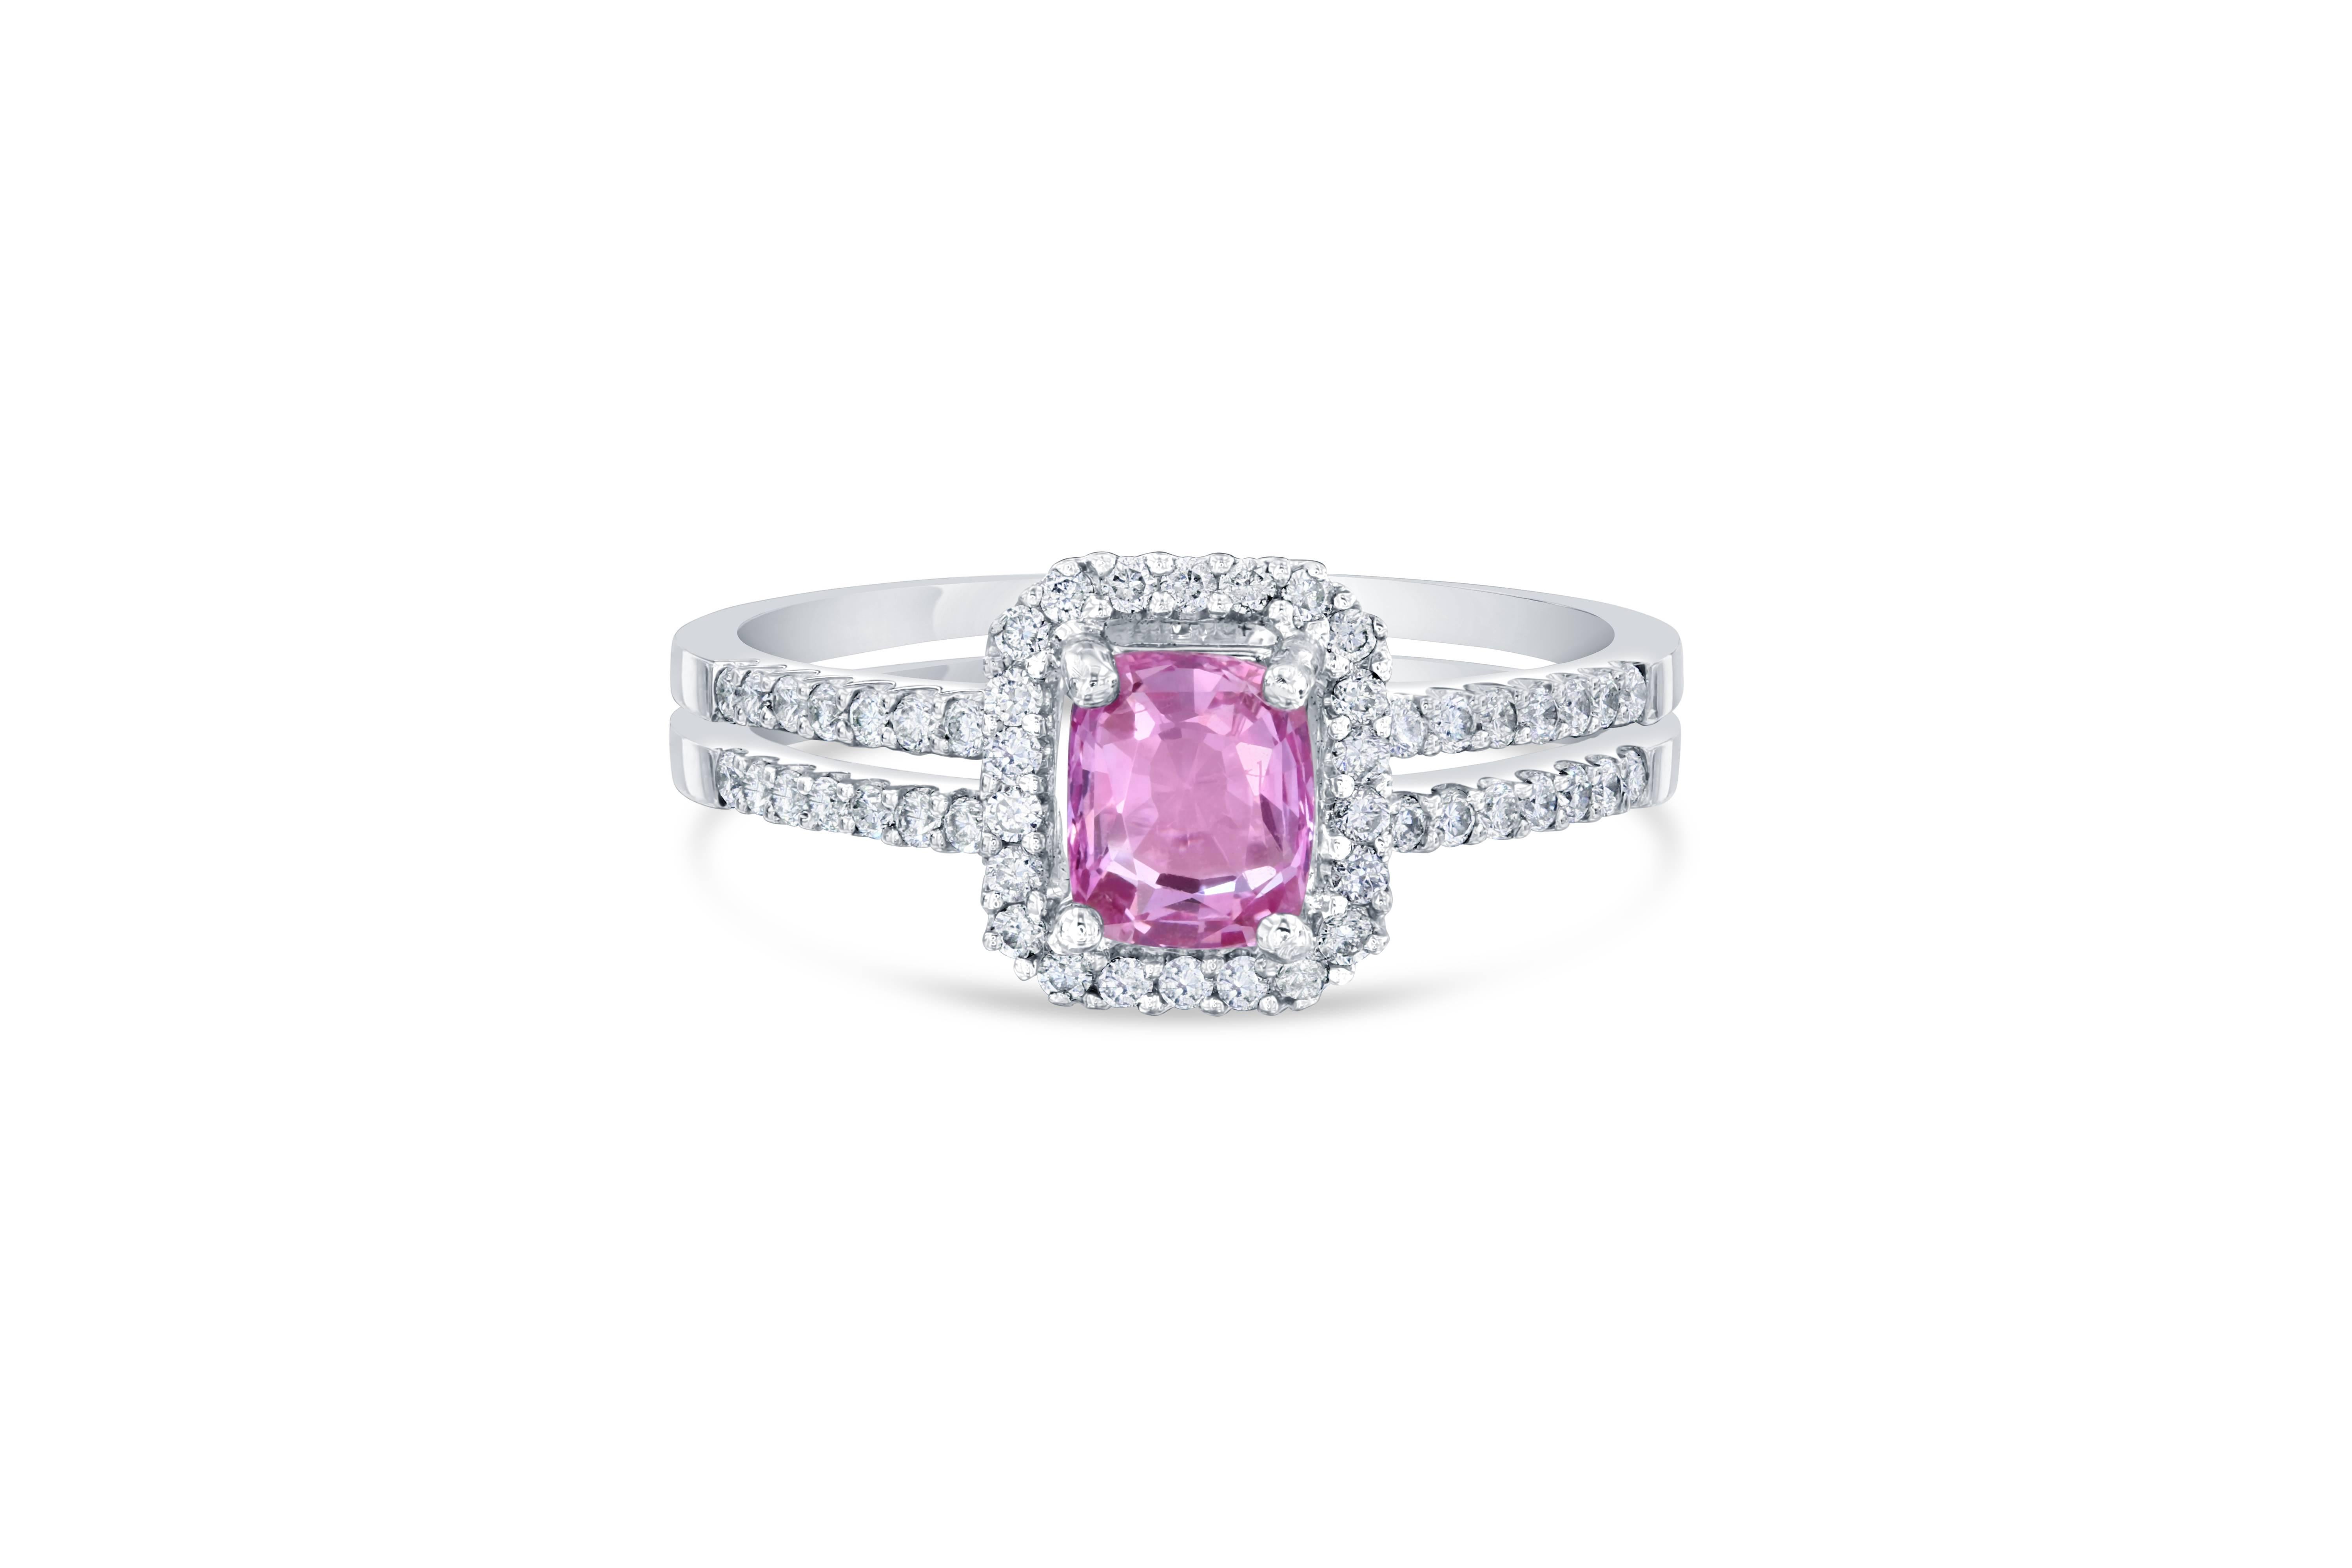 Gorgeous Pink Sapphire Diamond Ring with a beautiful setting! Can be a very unique Engagement Ring or Cocktail Ring! Also has a GIA Certificate #: 2195053396
The center Cushion Cut Pink Sapphire is 0.93 Carats surrounded by a halo and split shank of